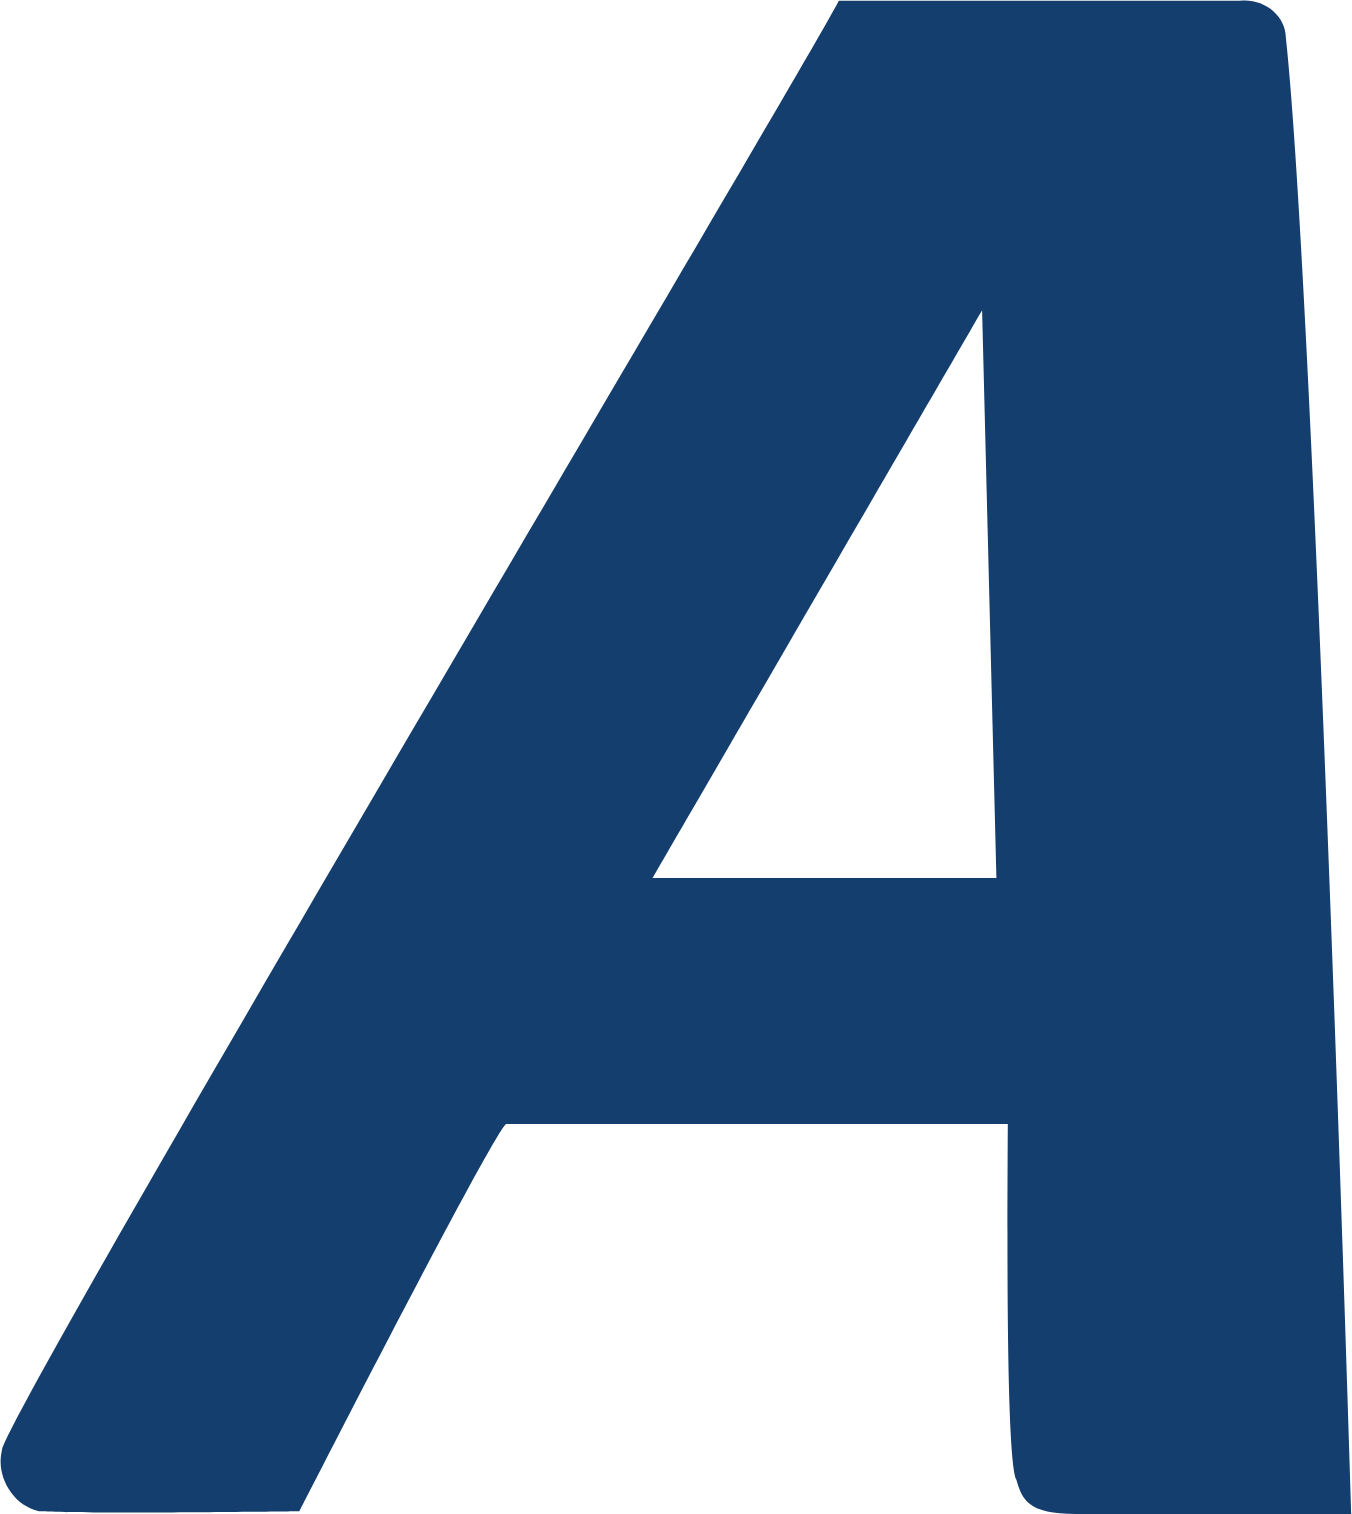 AltaGas logo in transparent PNG and vectorized SVG formats